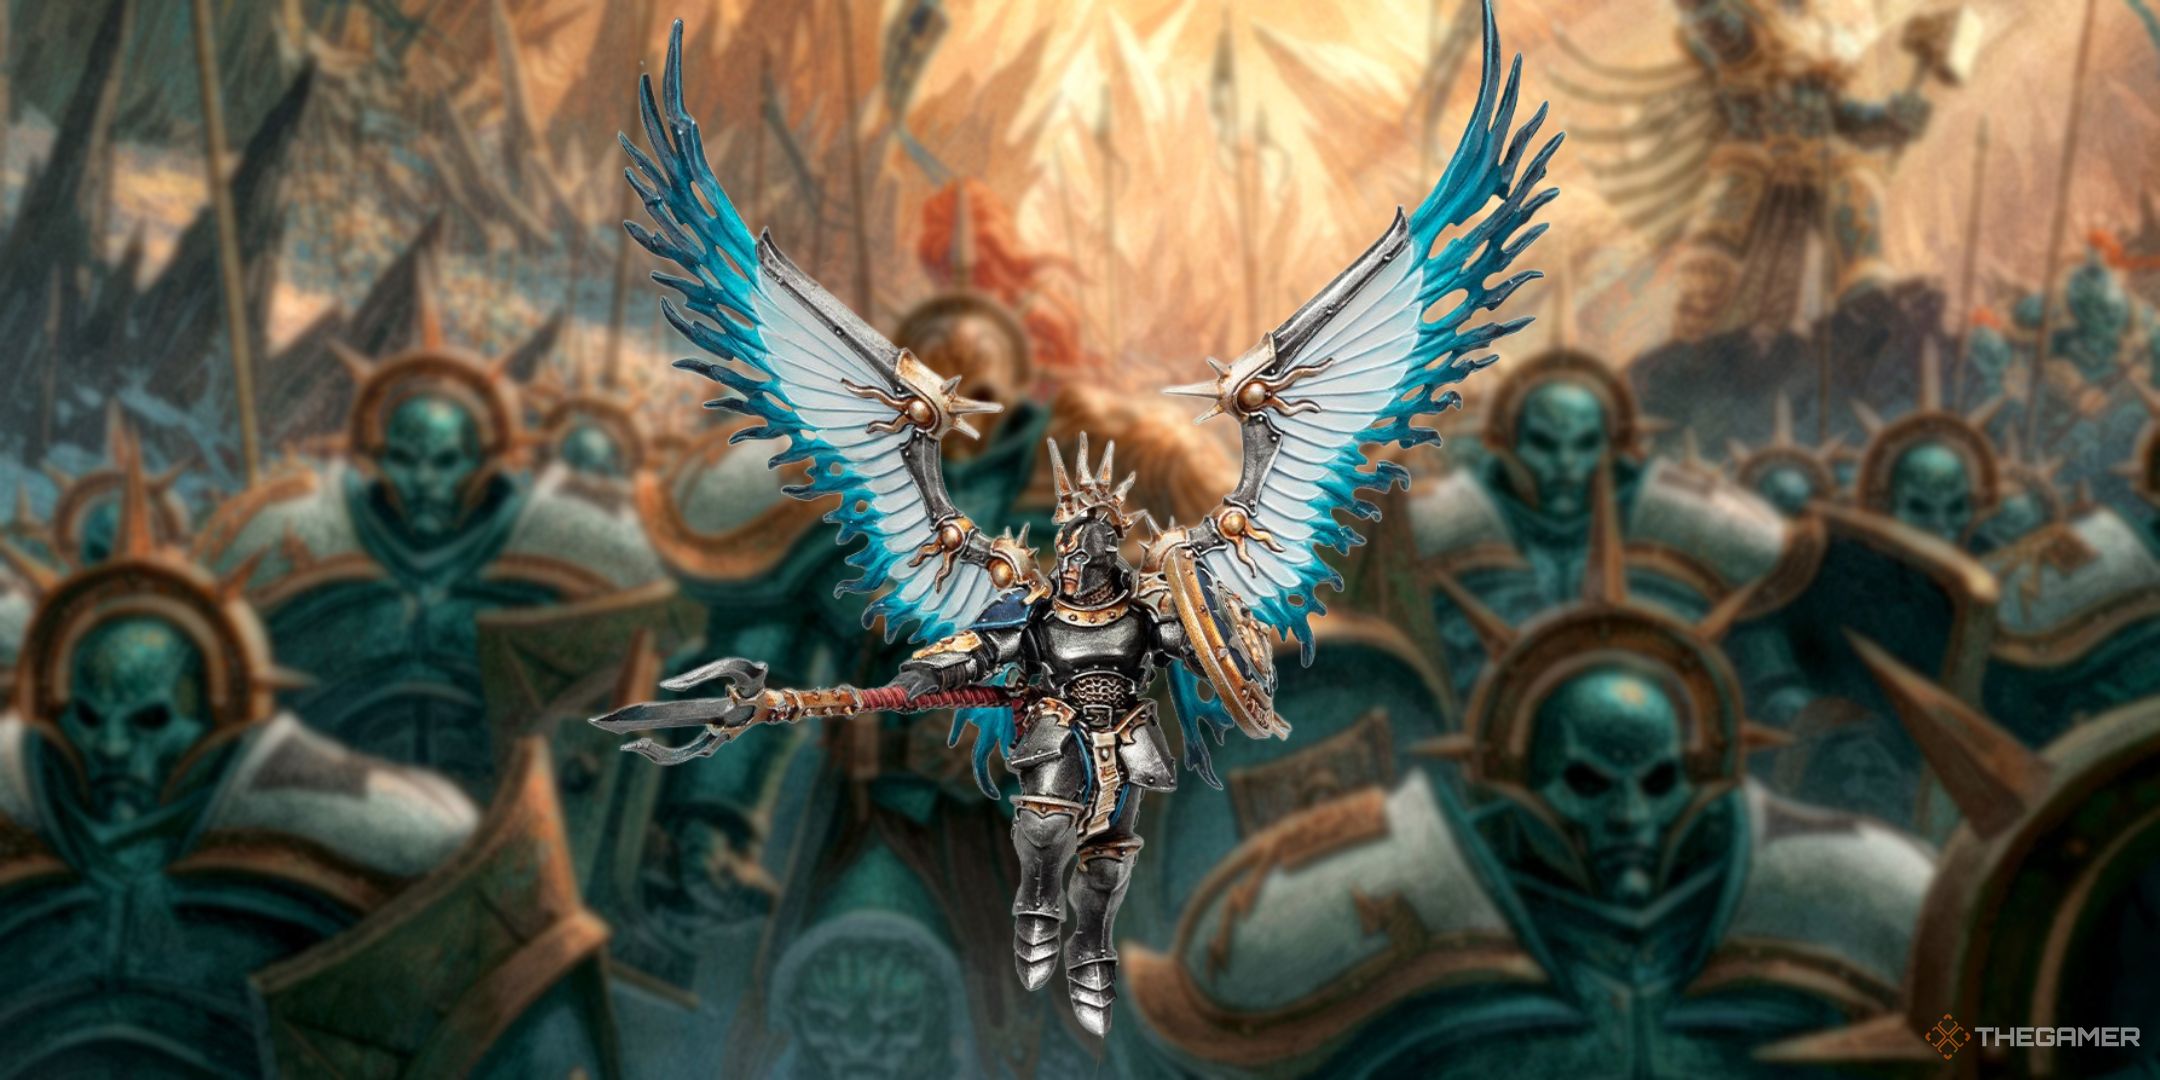 Warhammer Age of Sigmar Stormcast Prosecutor model over an illustrated background of old Stormcast